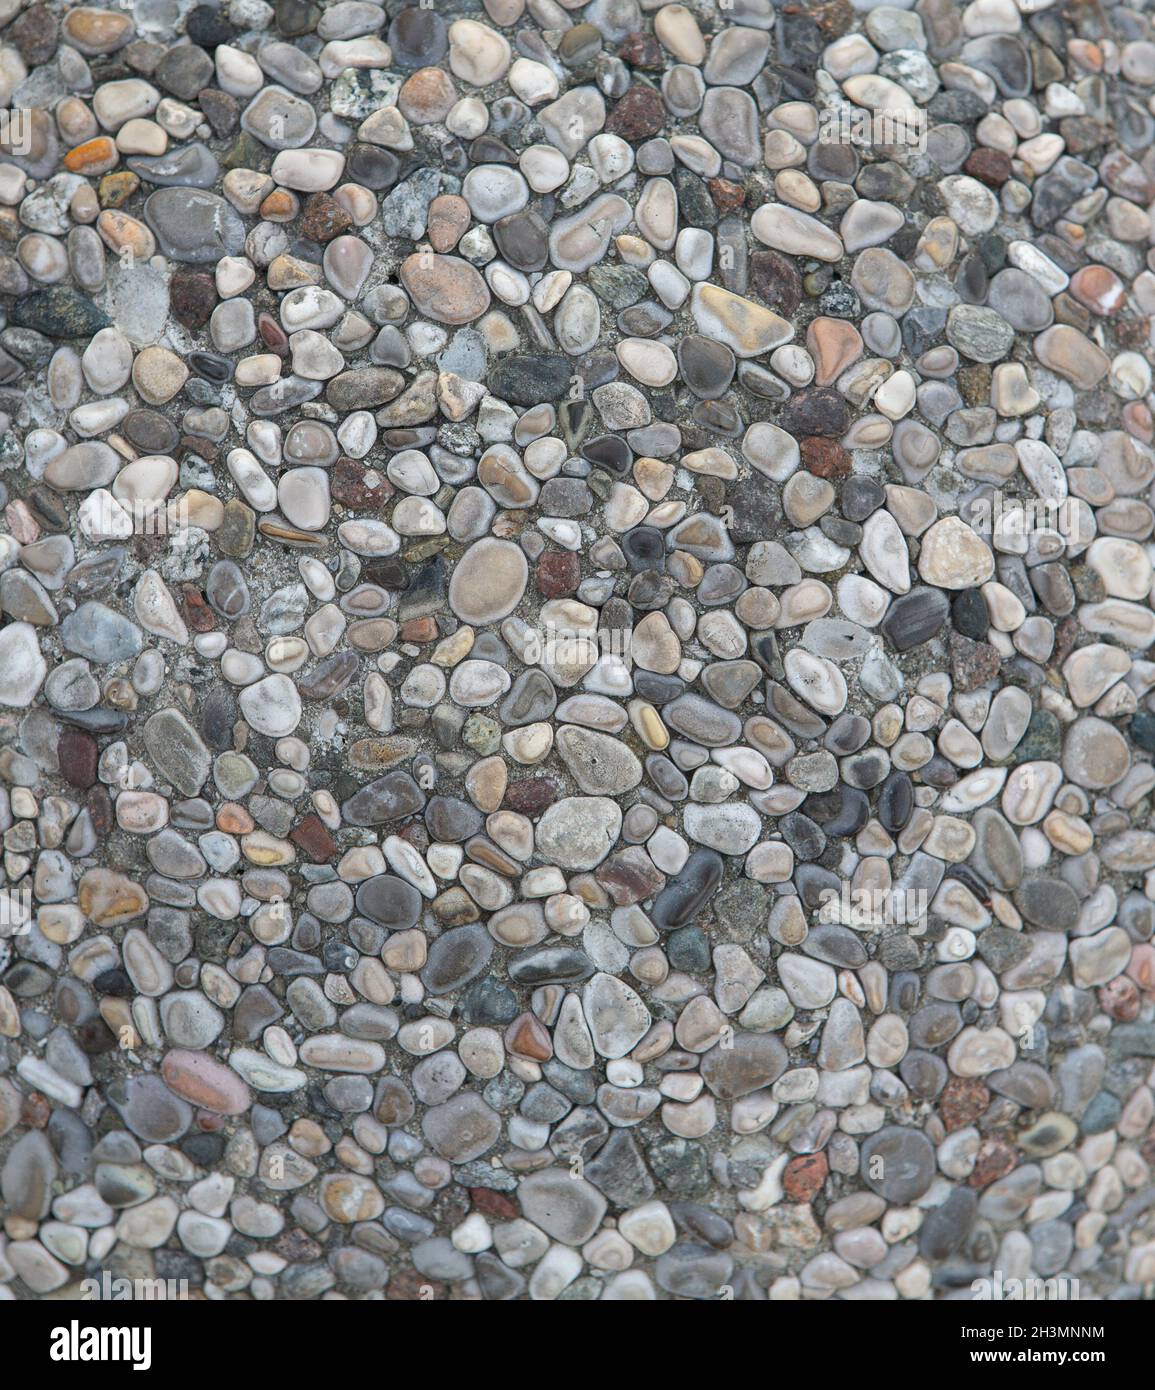 Multi-colored sea pebbles at pathway outdoors. Small round stones are in cement mortar. Selective focus at centre of image. Abst Stock Photo